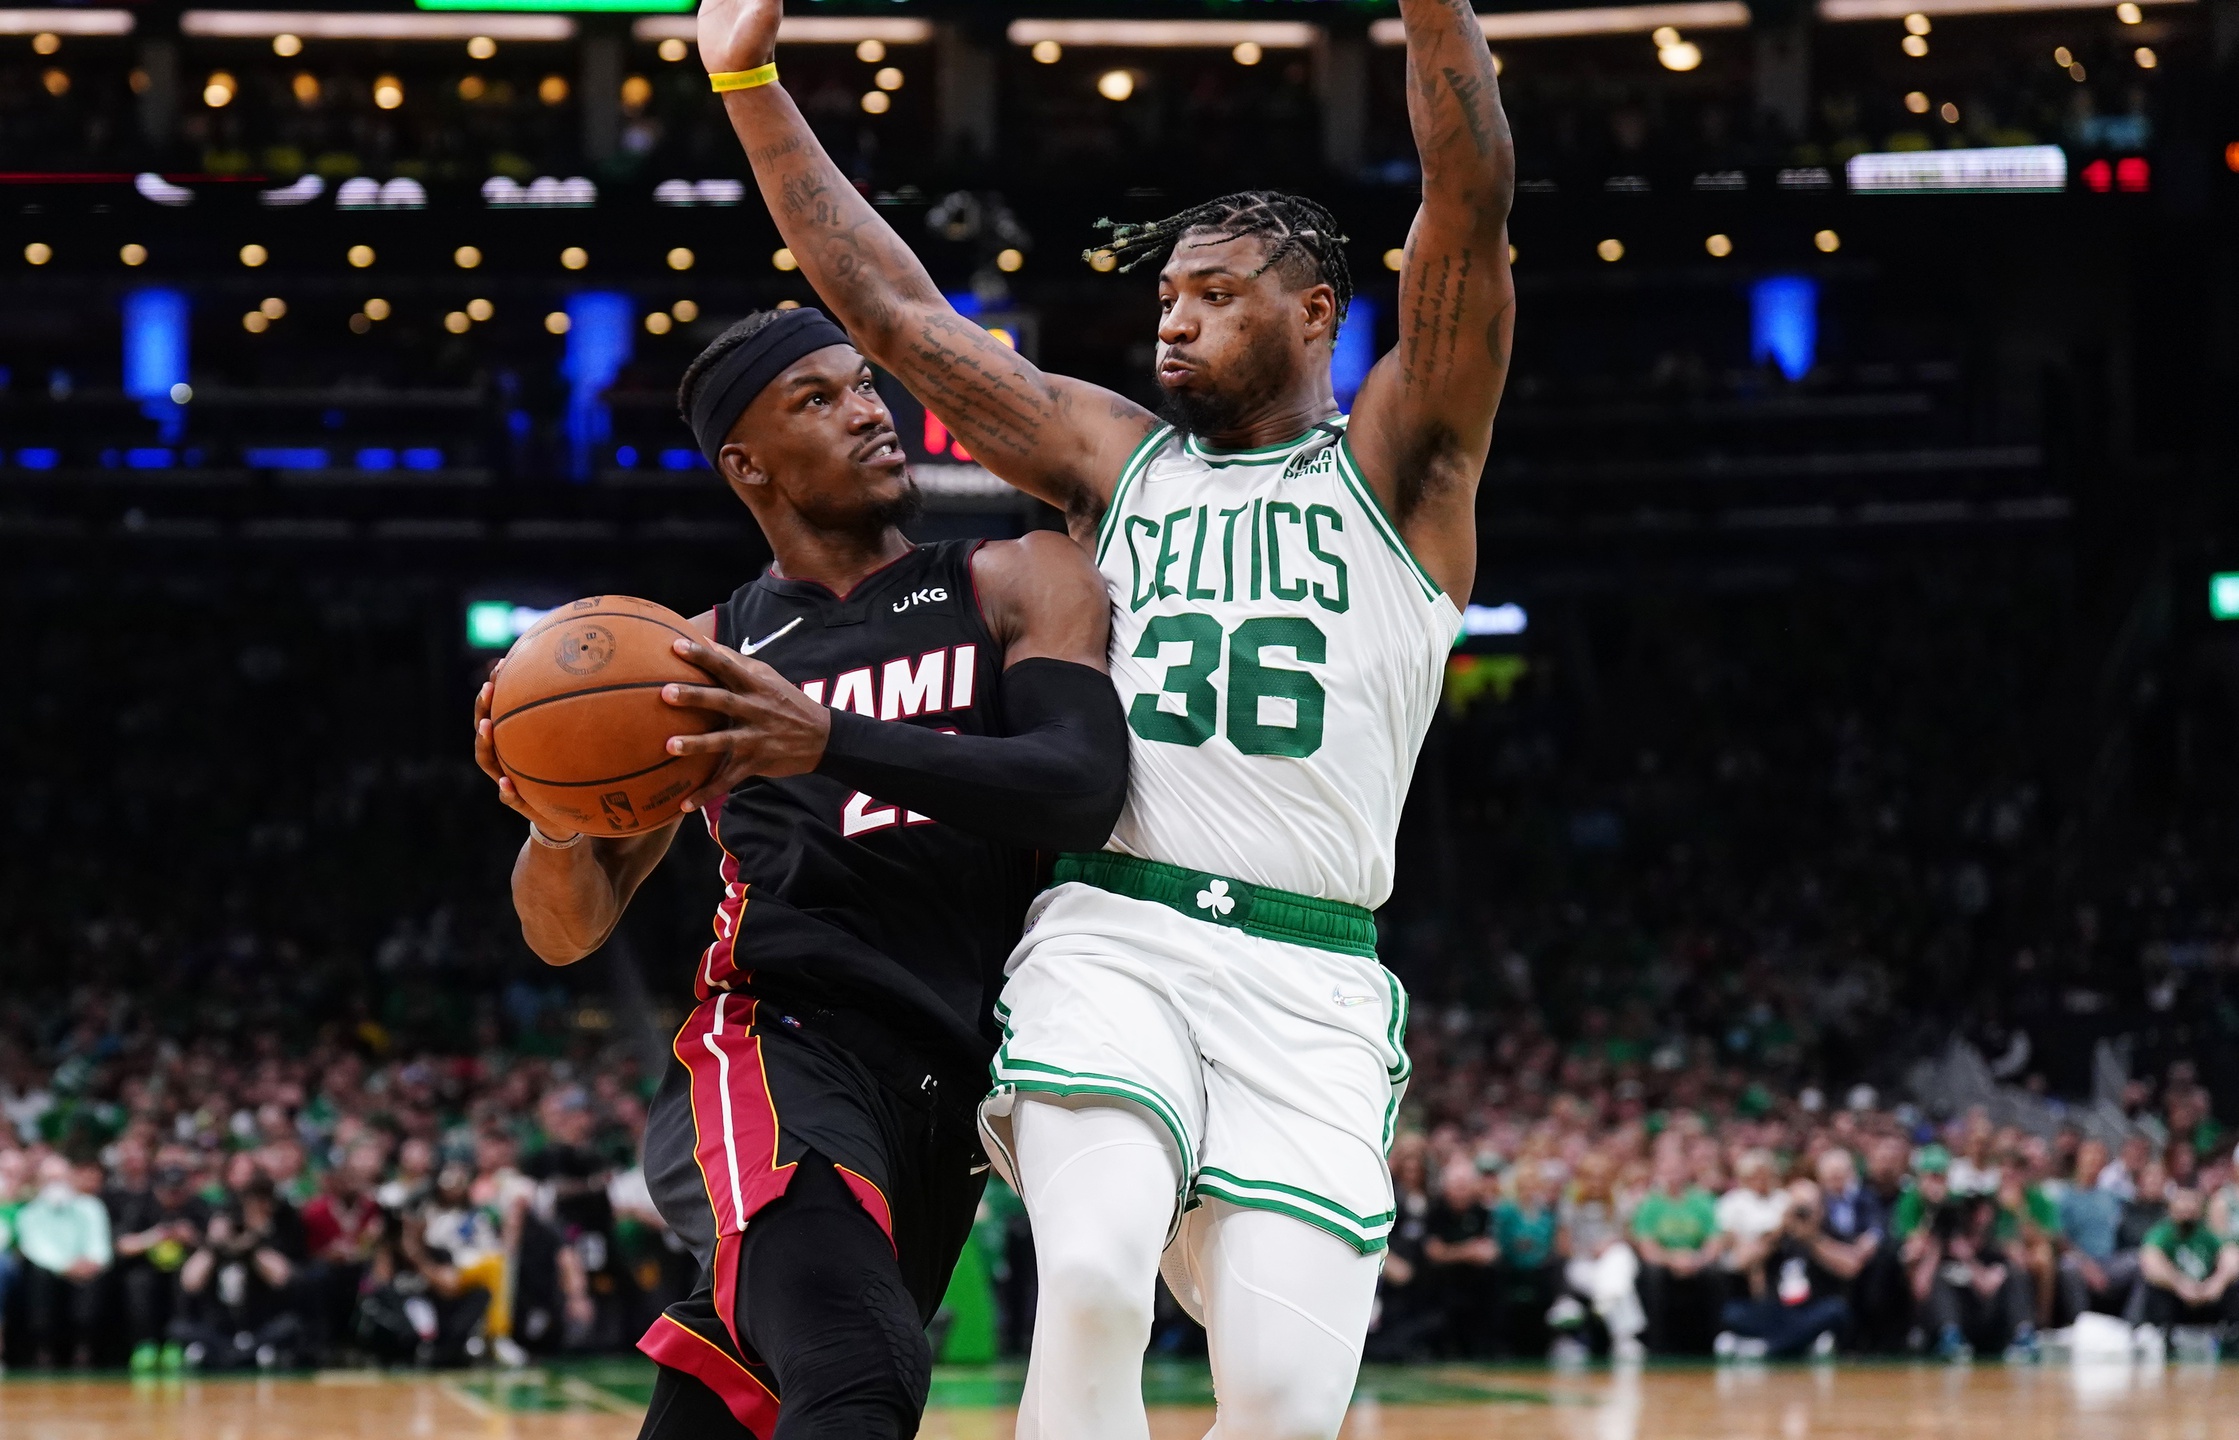 Miami Heat forward Jimmy Butler (22) drives to the basket against Boston Celtics guard Marcus Smart (36) in the second quarter during game three of the 2022 eastern conference finals at TD Garden.